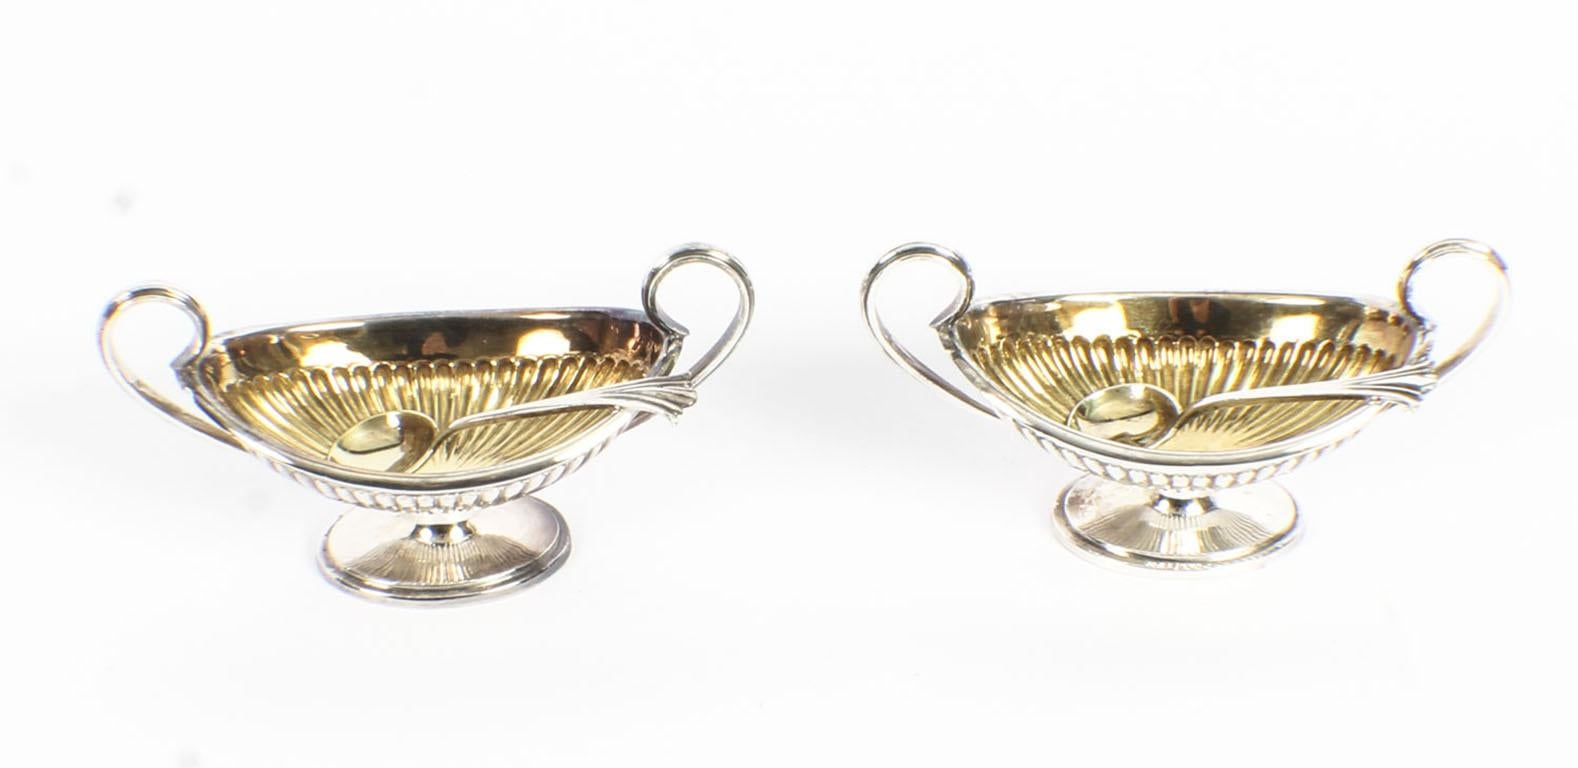 Late 19th Century Antique Pair of Sterling Silver Salts & Spoons by Fenton Bros 1881, 19th Century